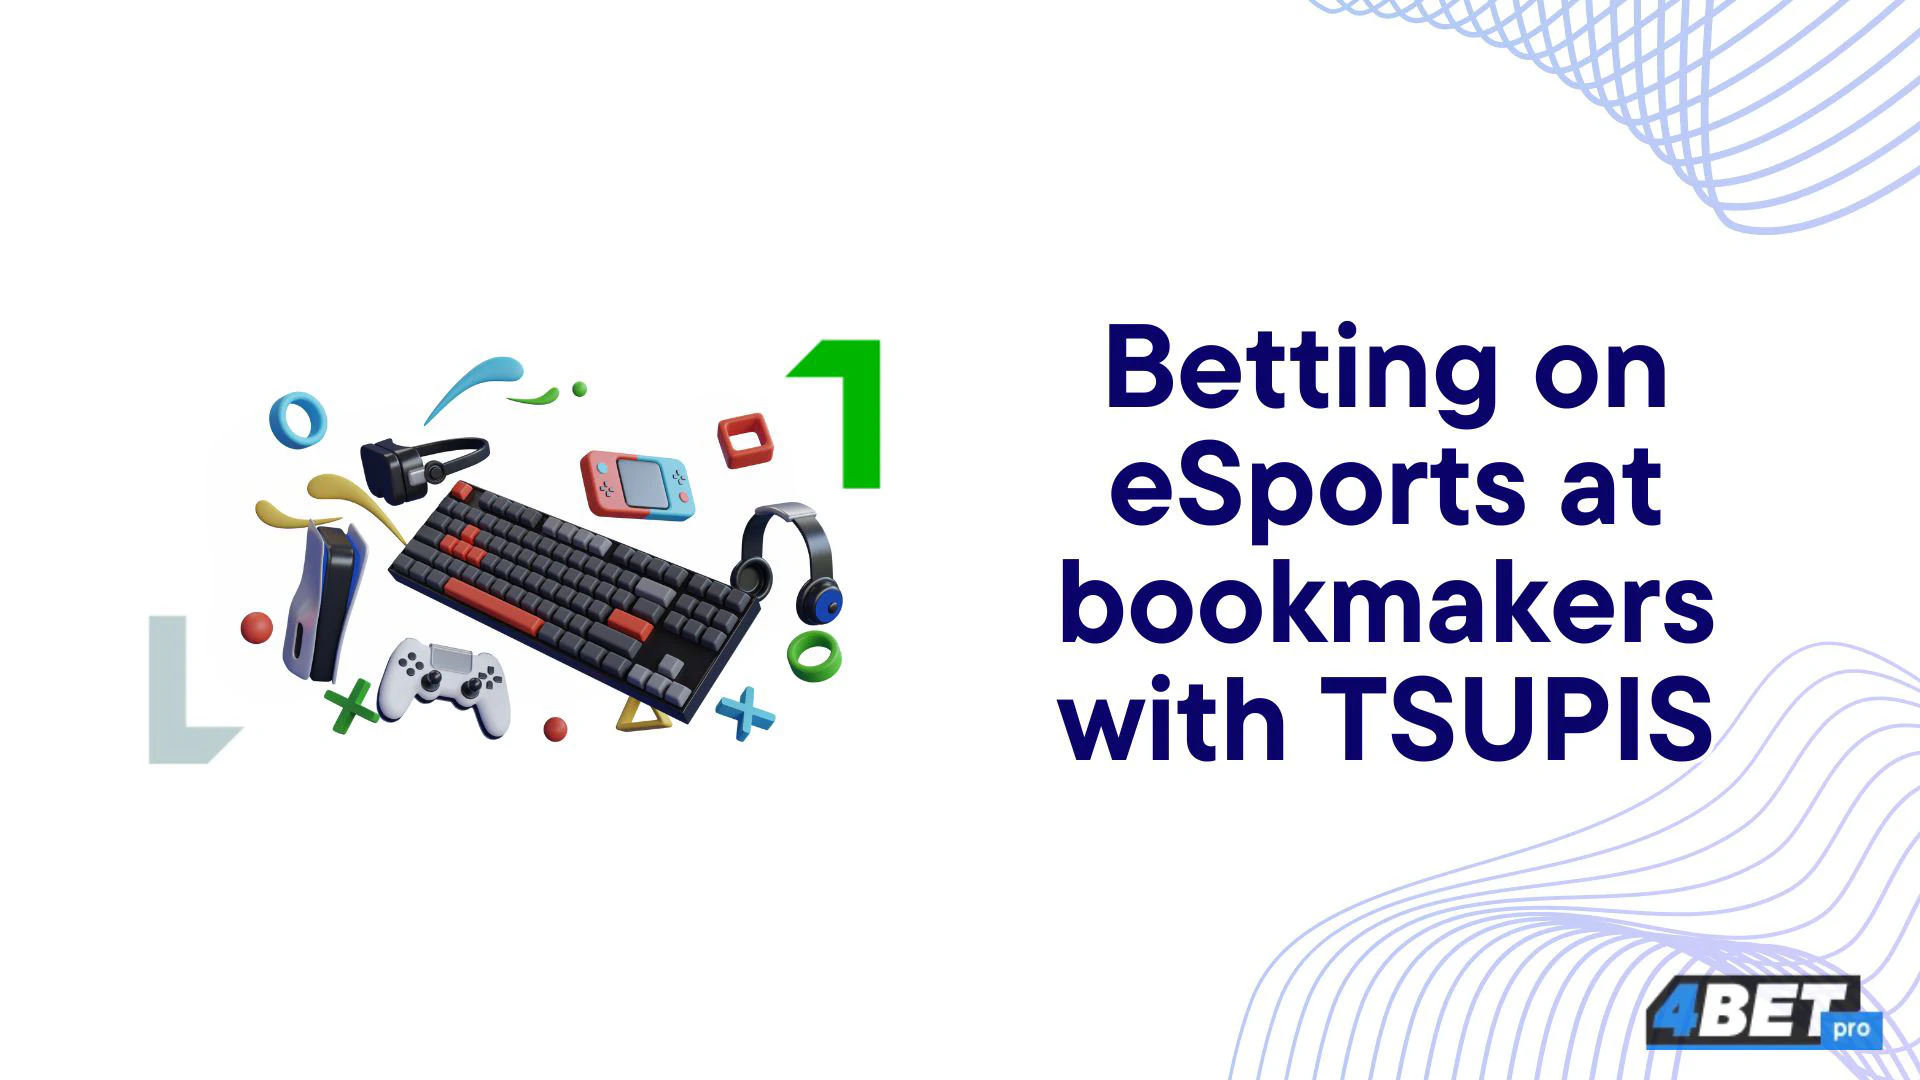 Reliable bookmakers of Russia TSUPIS